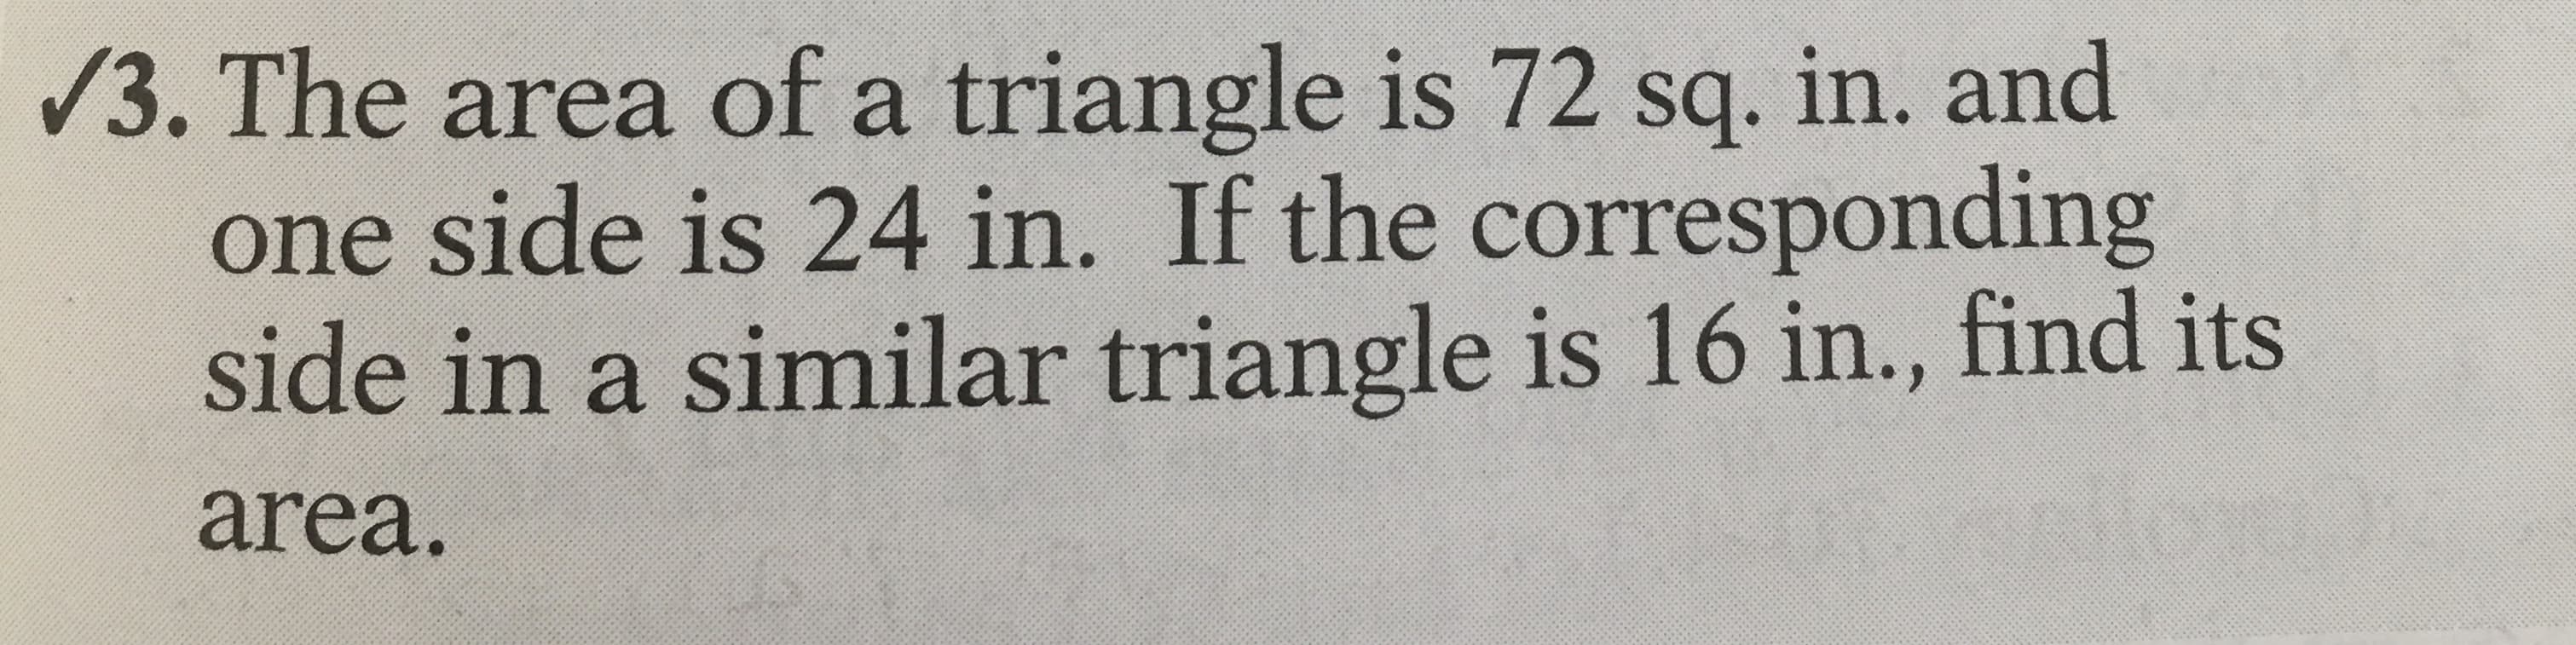 /3. The area of a triangle is 72 sq. in. and
one side is 24 in. If the corresponding
side in a similar triangle is 16 in., find its
area.
